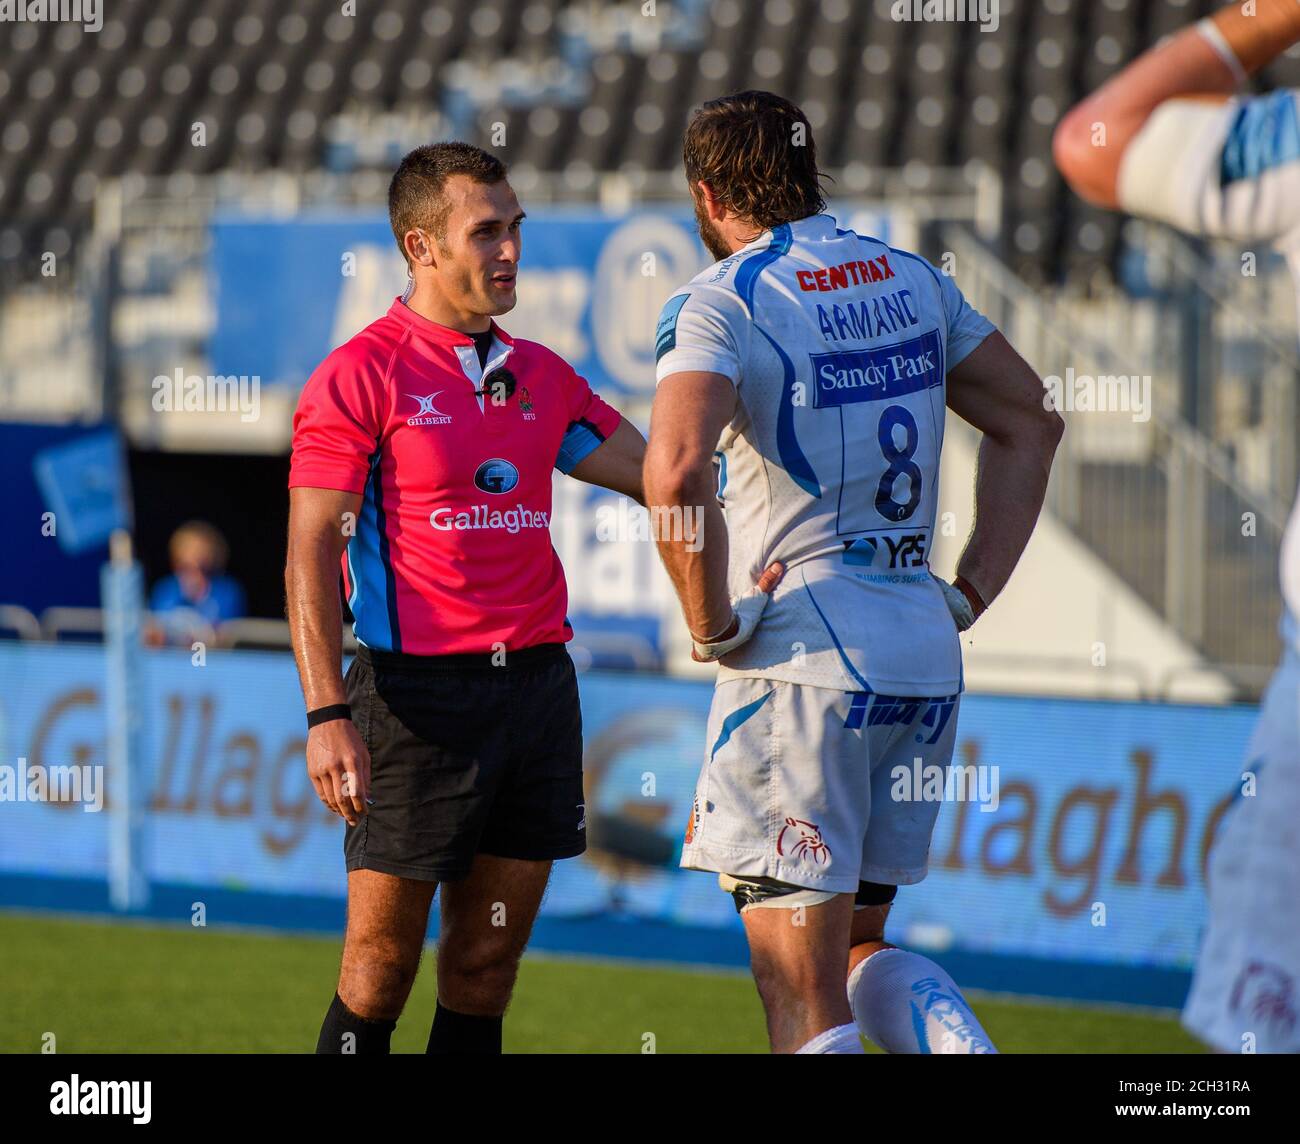 LONDON, UNITED KINGDOM. 13th, Sep 2020. Referee: Adam Leal (5th Premiership game) talks to Don Armand Exeter Chiefs (right) during Gallagher Premiership Rugby Match Round 20 between Saracens vs Exeter Chiefs at Allianz Park on Sunday, 13 September 2020. LONDON ENGLAND.  Credit: Taka G Wu/Alamy Live News Stock Photo